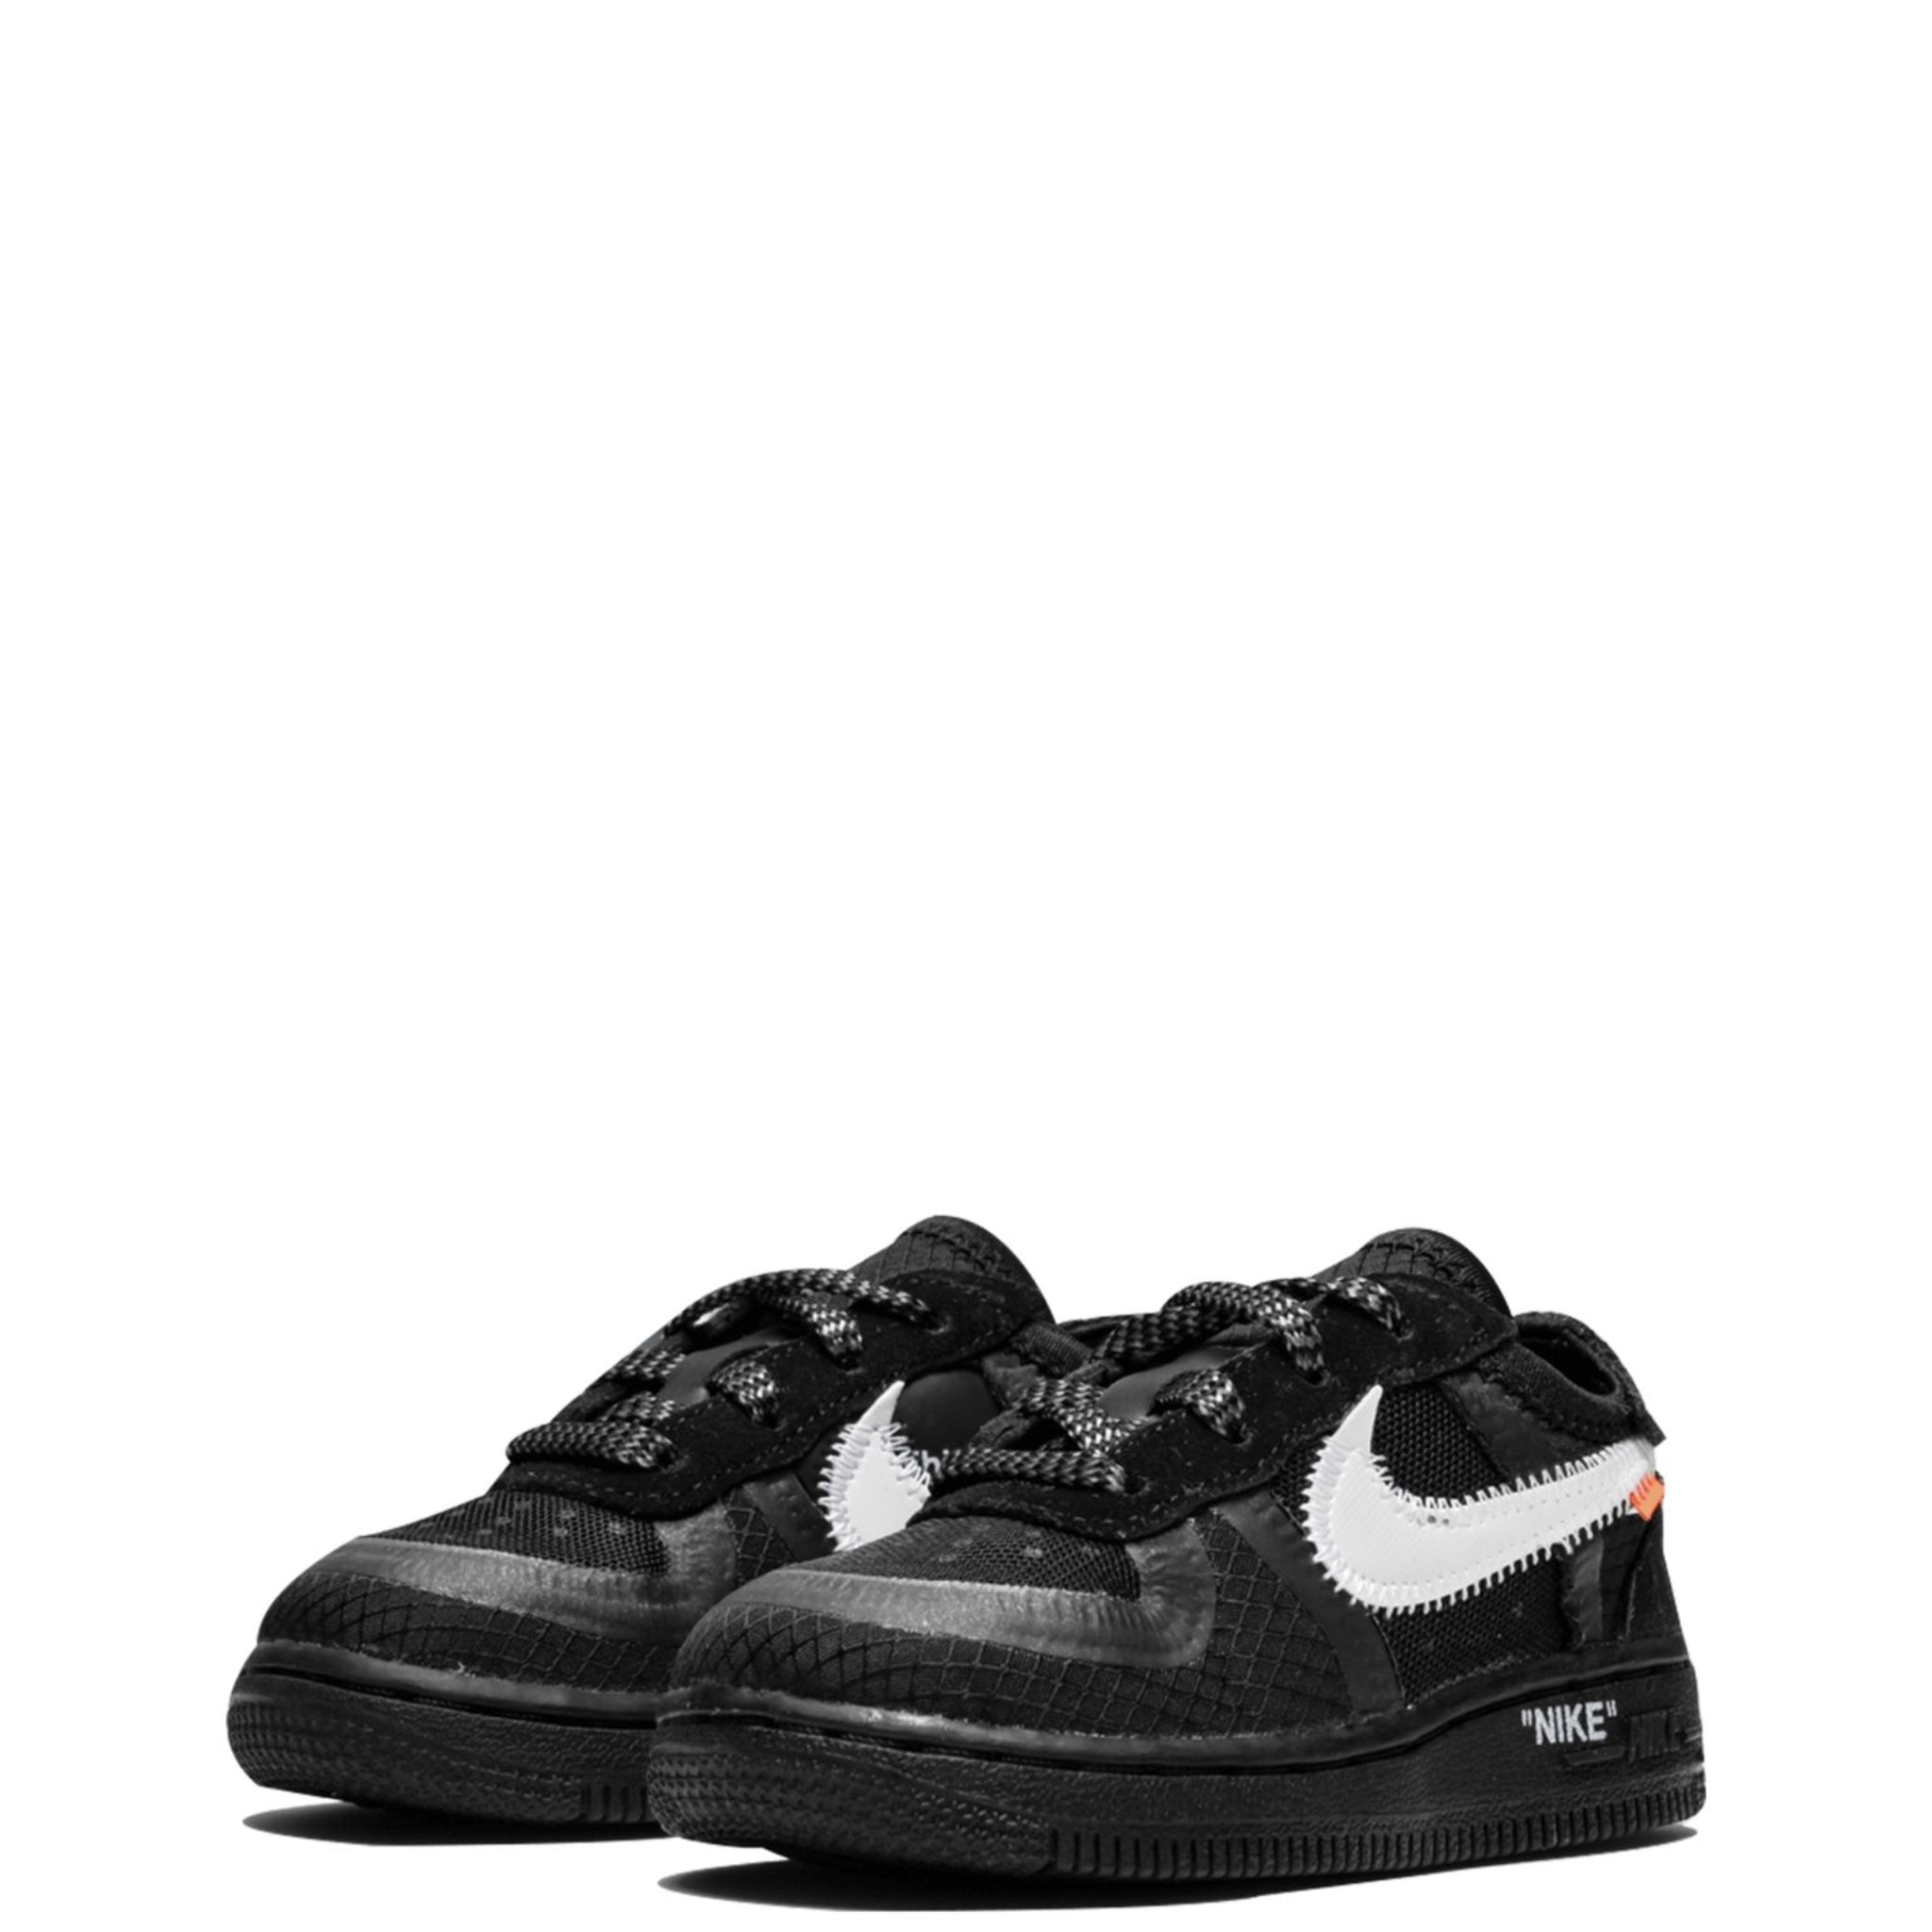 NIKE X OFF-WHITE AIR FORCE 1 LOW BLACK (TD)